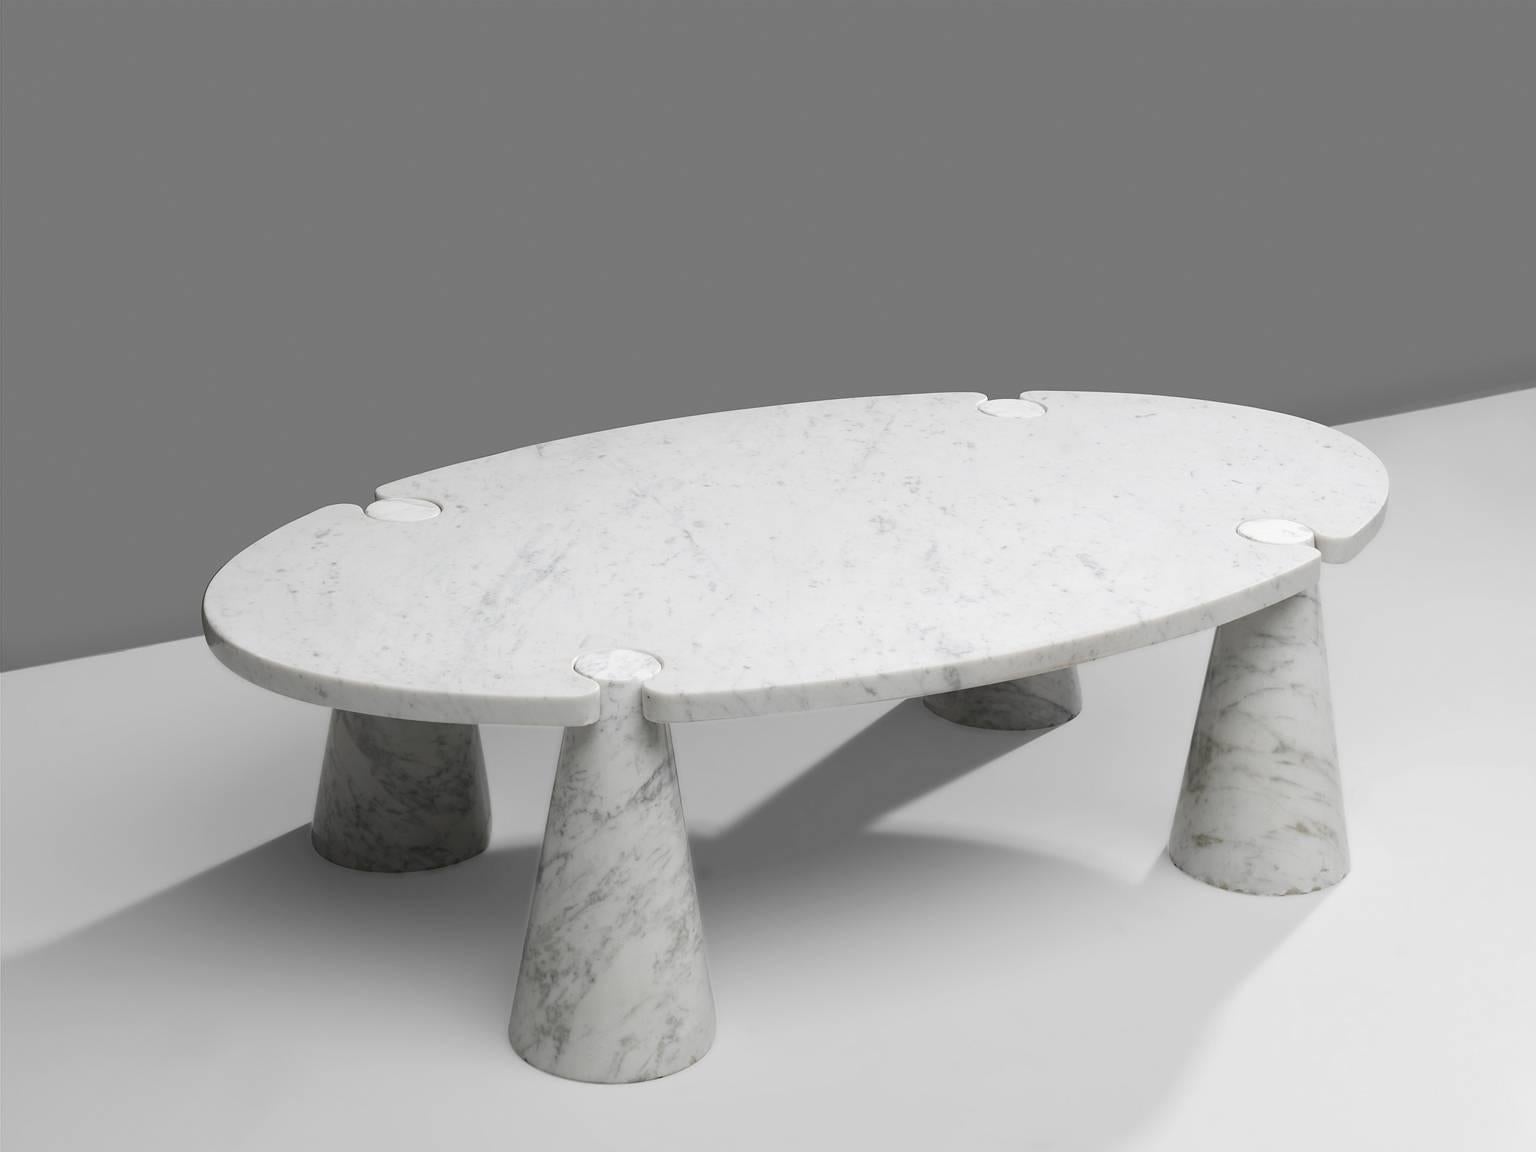 Cocktail table by Angelo Mangiarotti, marble, 1970s. 

This sculptural table by Angelo Mangiarotti is a skillful example of postmodern design. The oval table features no joints or clamps and is architectural in its structure. The table rests on